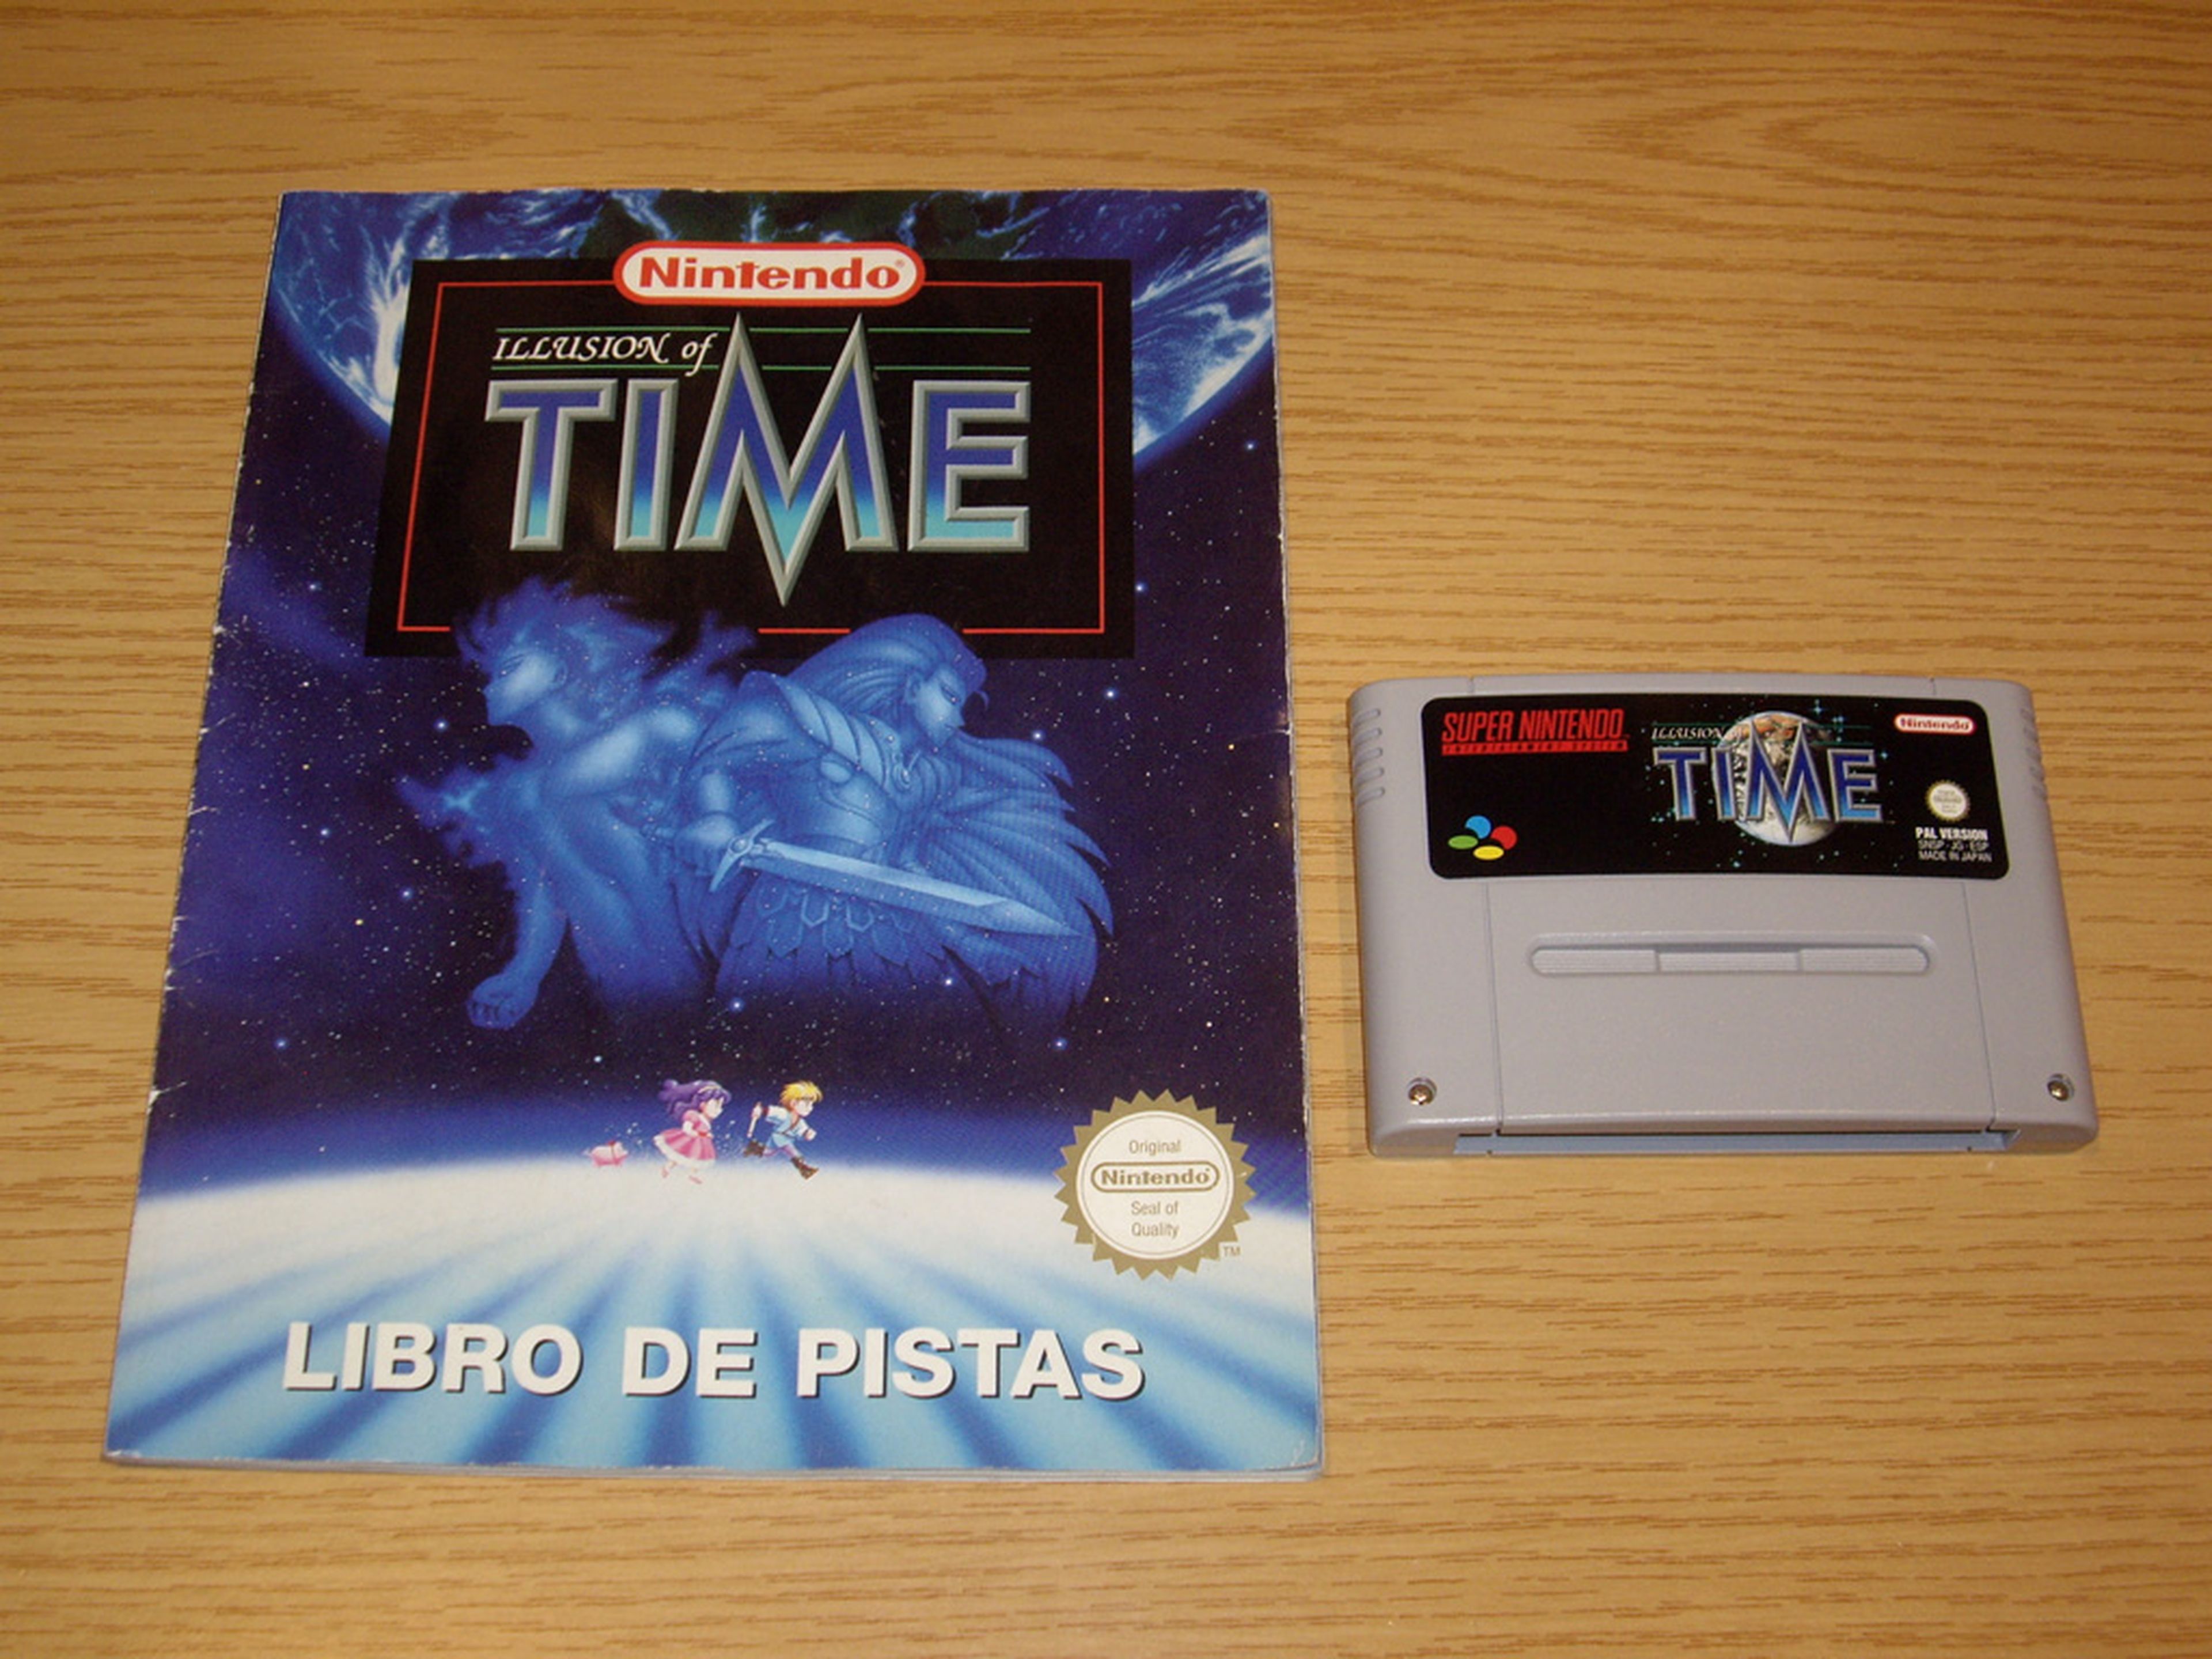 Hobby Consolas, hace 20 años: Illusion of Time